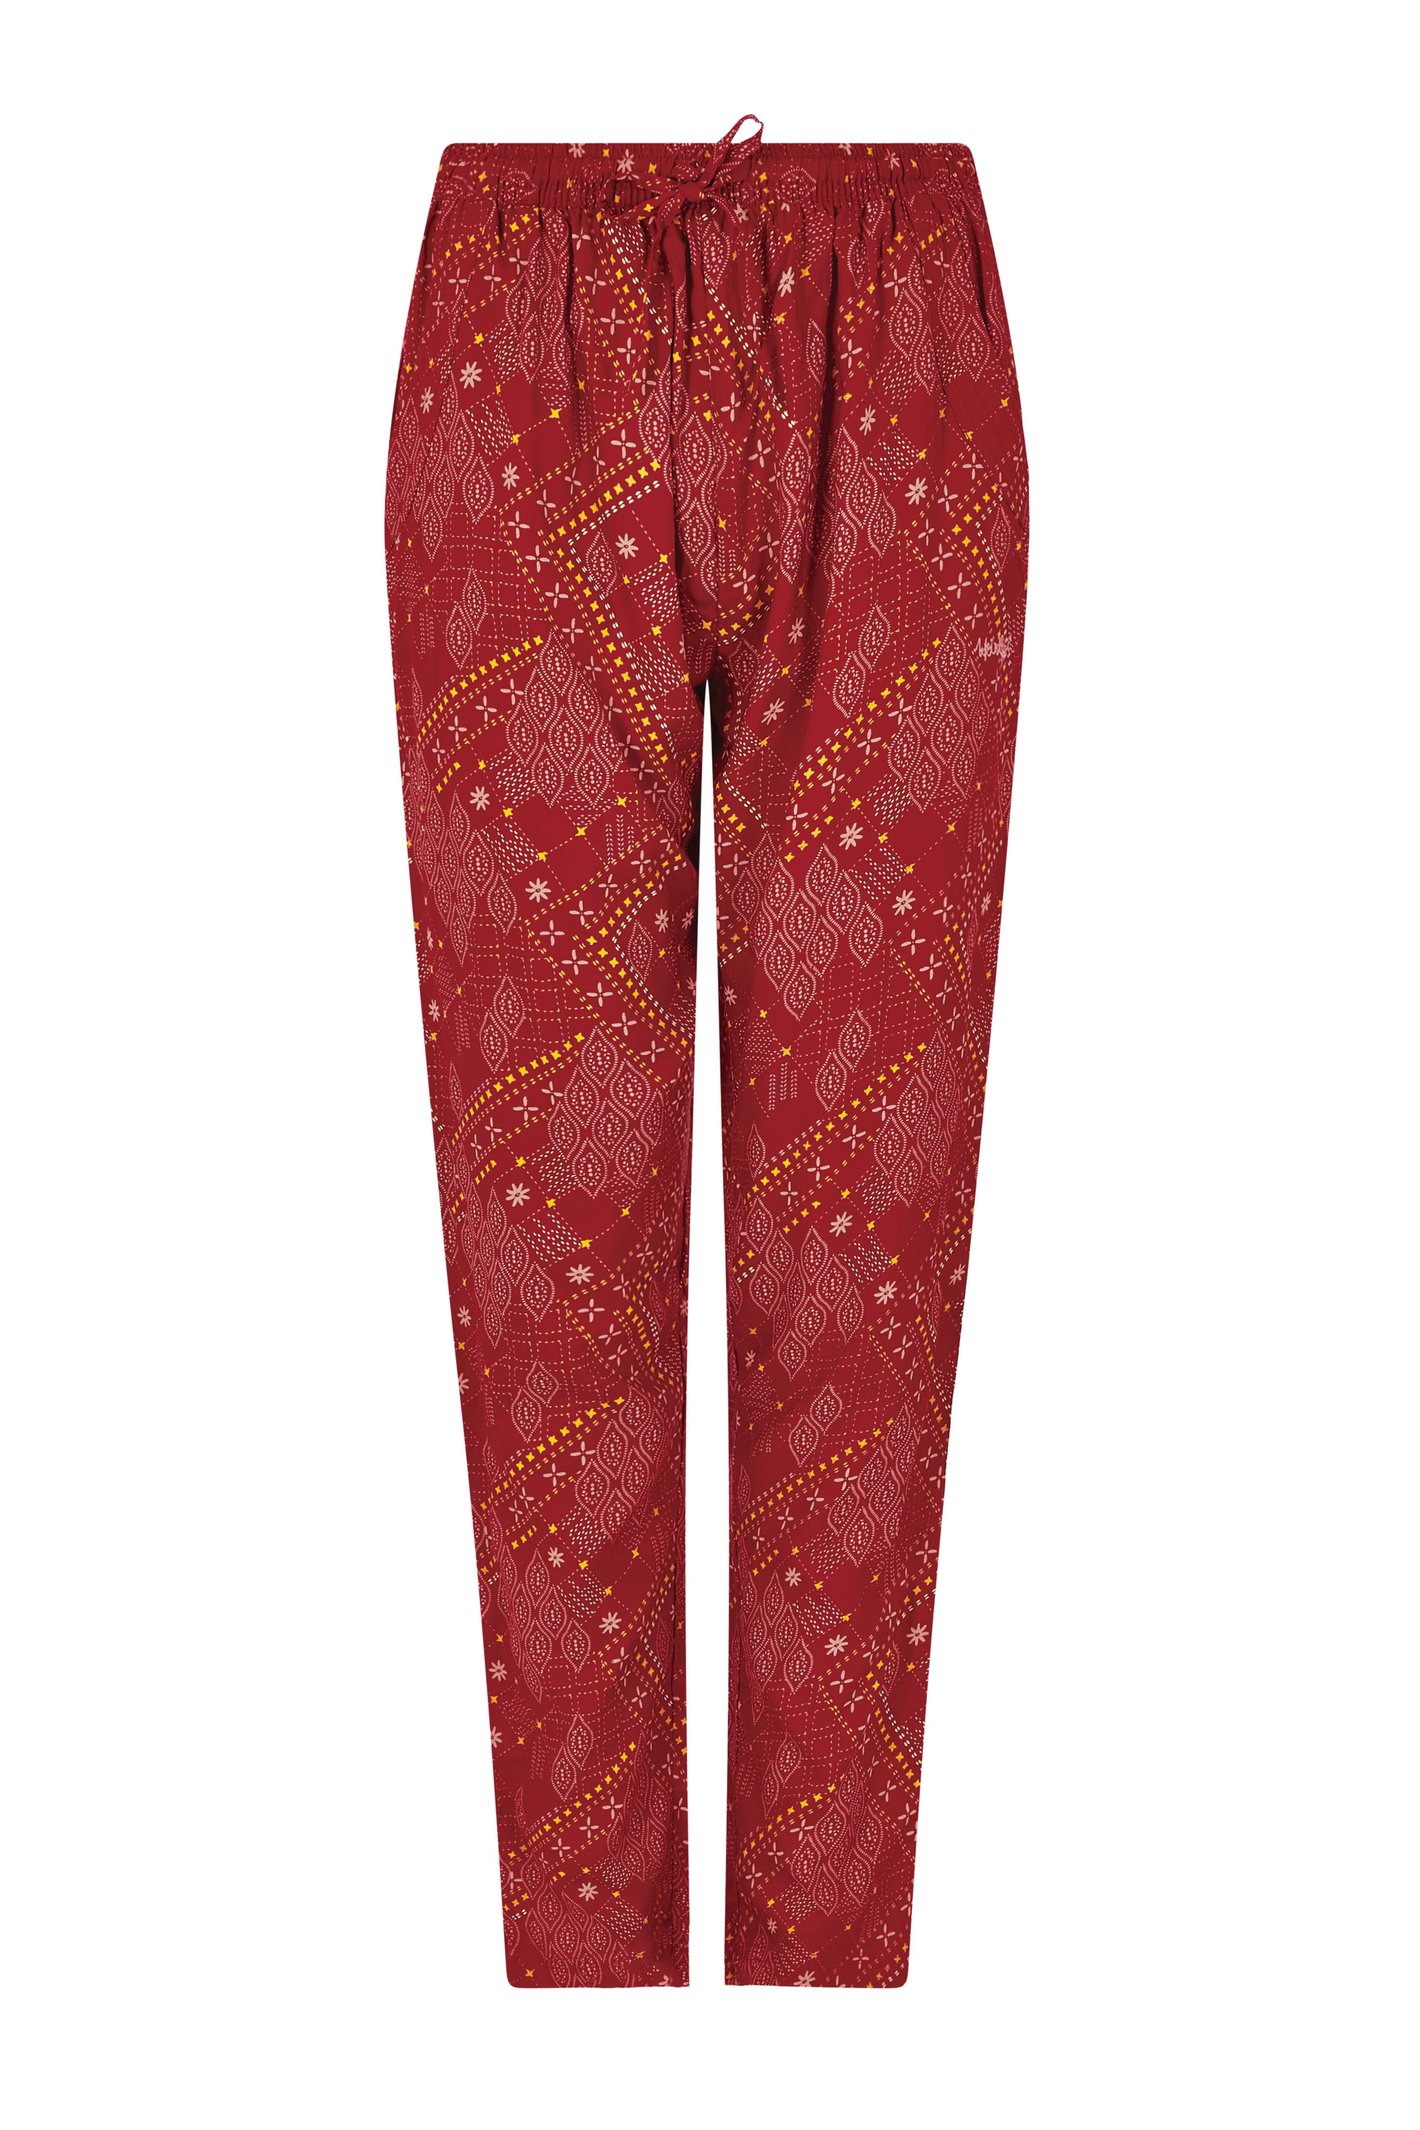 Weird Fish Tinto Eco Viscose Printed Trousers Chilli Red Size 22